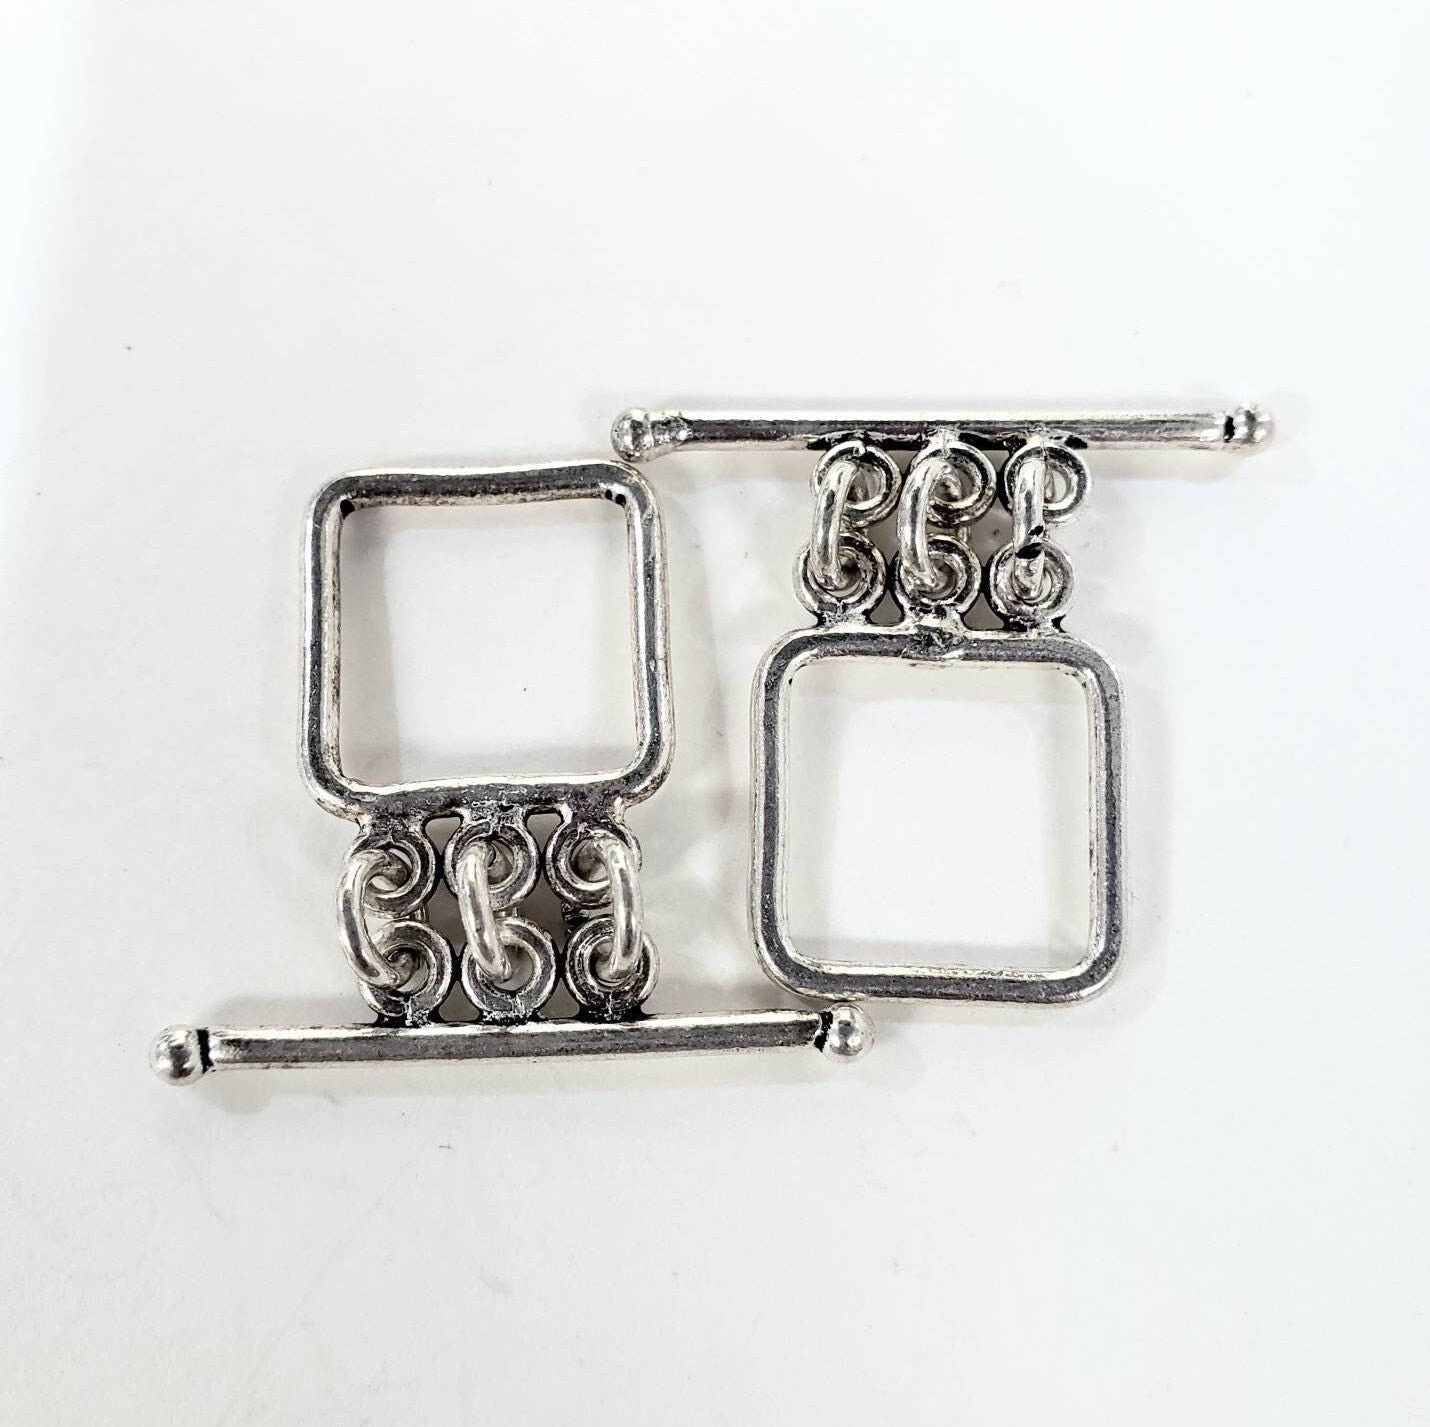 925 Sterling silver 3 loop square 15 mm bali handmade vintage toggle clasp, necklace bracelet jewelry making findings.1 set